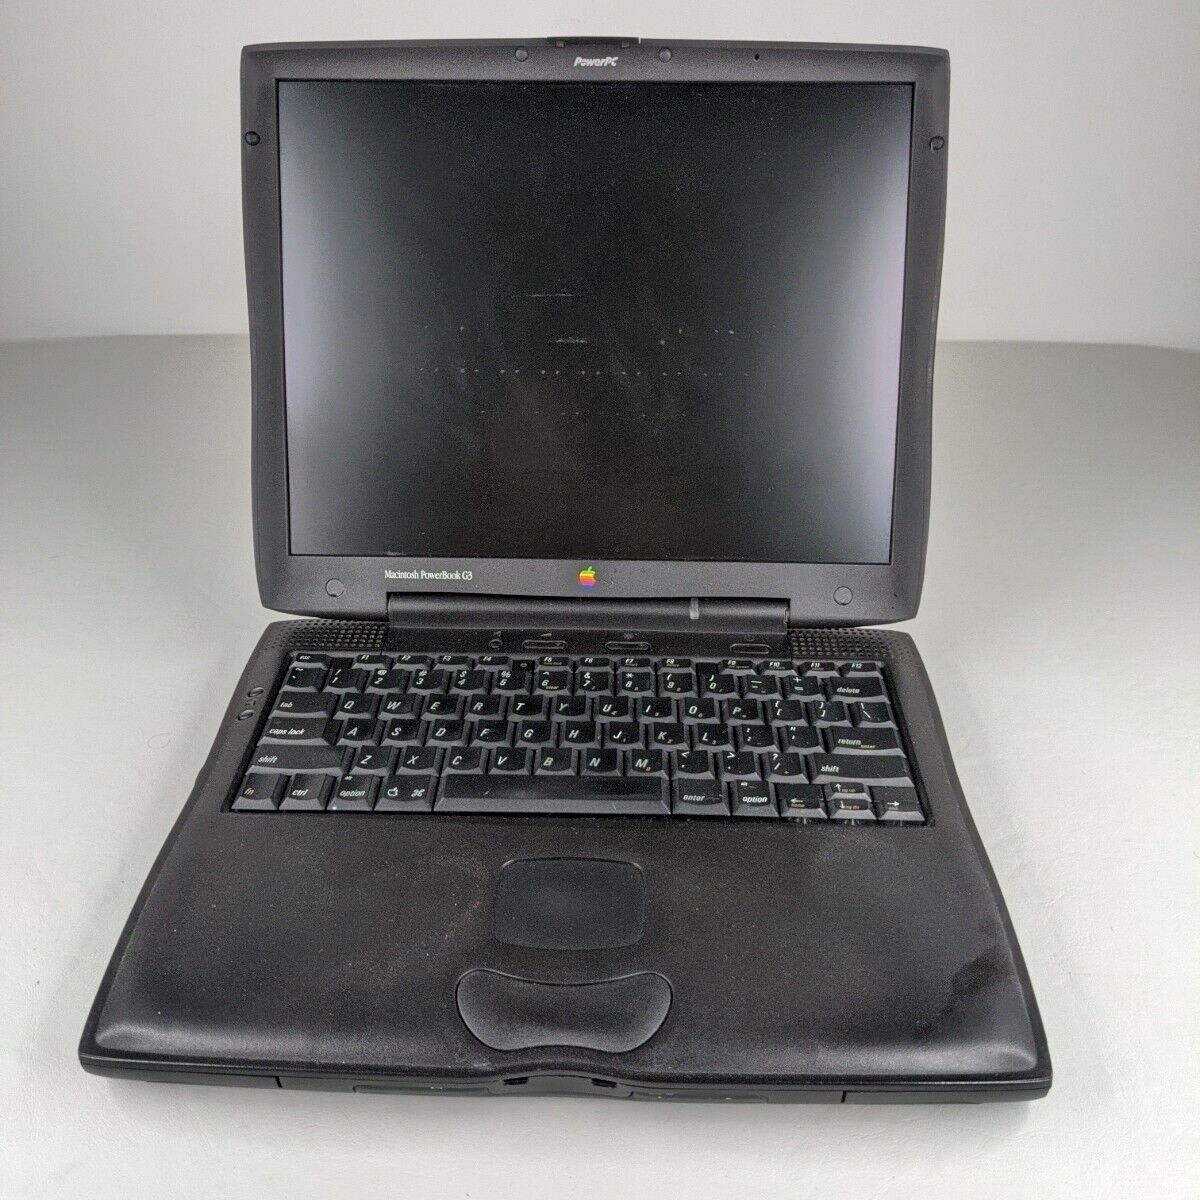 VTG 1998 Apple Macintosh PowerBook G3 M4753 *Turns On But Doesn't Fully Load*